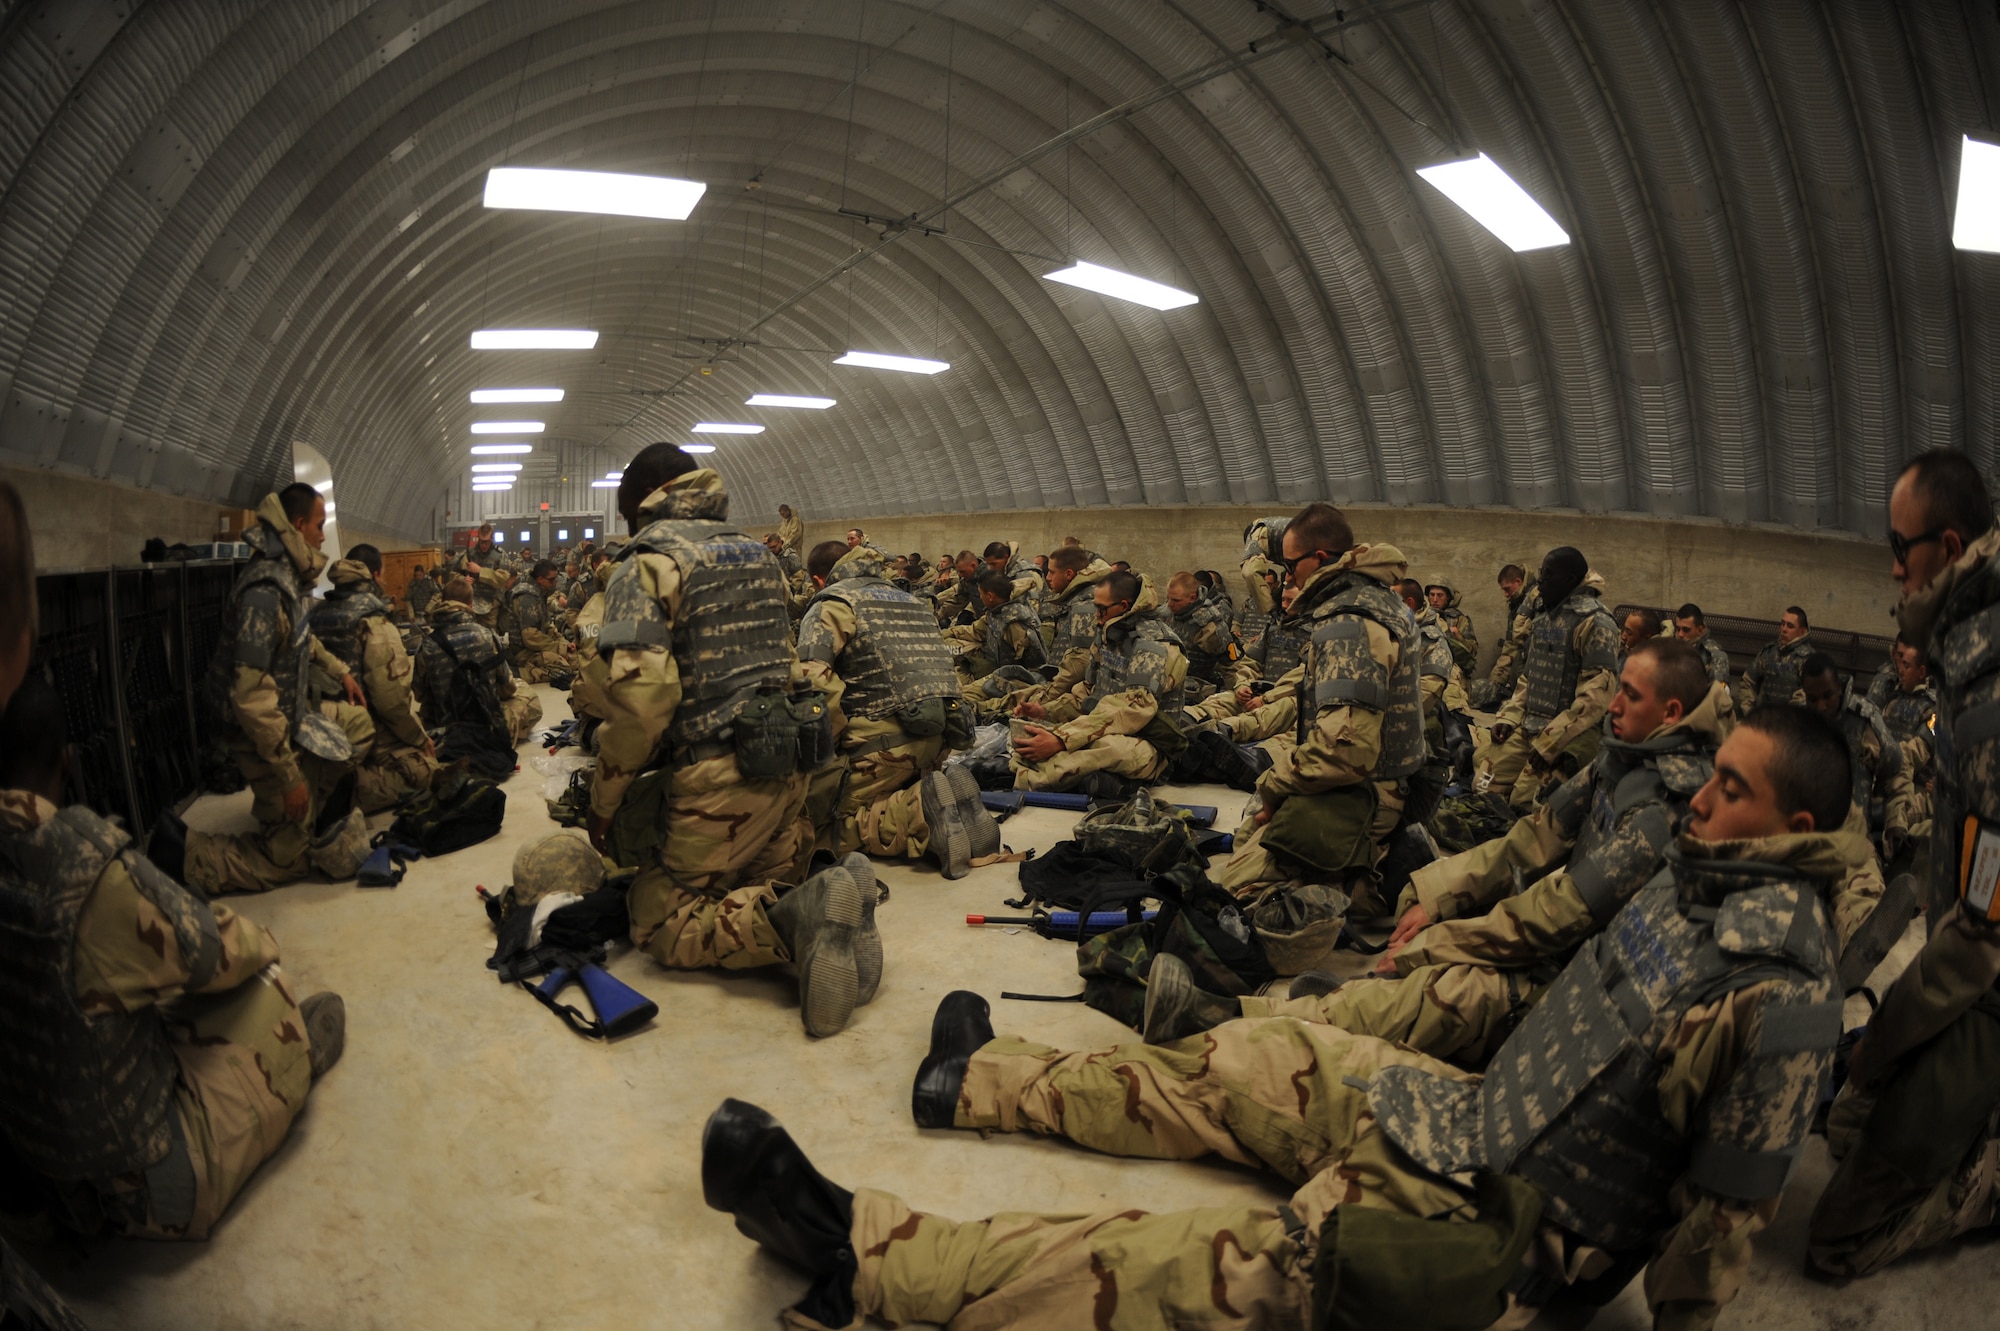 Airmen Basic trainees take a break inside a hard shelter after inspecting each others body armor during the five-day deployment exercise called the Basic Expeditionary Airman Skills and Training, or BEAST, which kicked off Dec. 15 at Lackland Air Force Base, Texas. The BEAST is the newly built complex added into the extended, 8.5-week Basic Military Training curriculum that began Nov. 5. (U.S. Air Force photo/Staff Sgt. Desiree N. Palacios) 